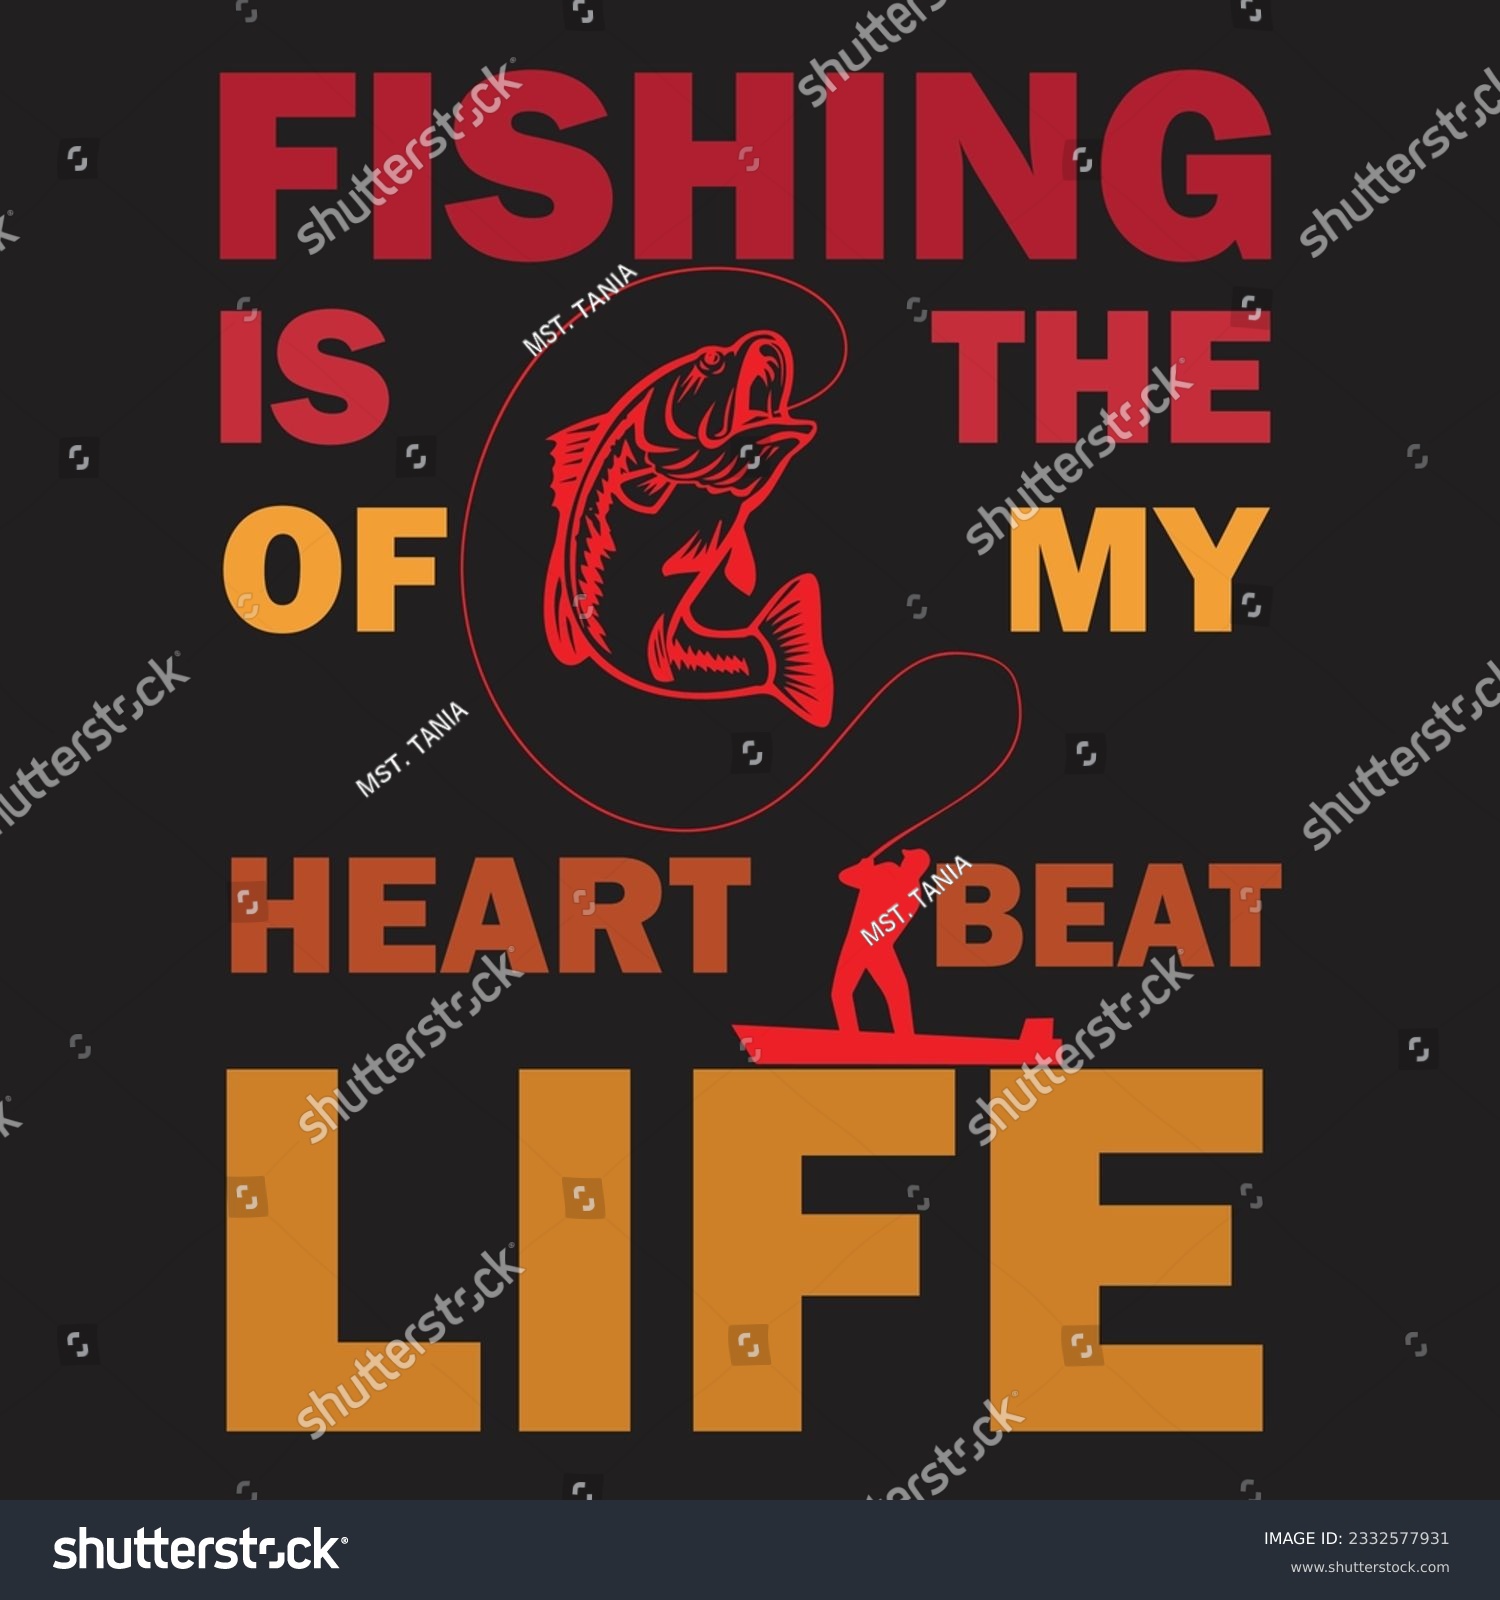 SVG of l love fishing design,fishing svg,life is game svg,hooked for life,eat sleep fish repeat design,like  fishing shirt,i like fishing,fishing is the of my heart beat life,a bad day fishing is beter than. svg